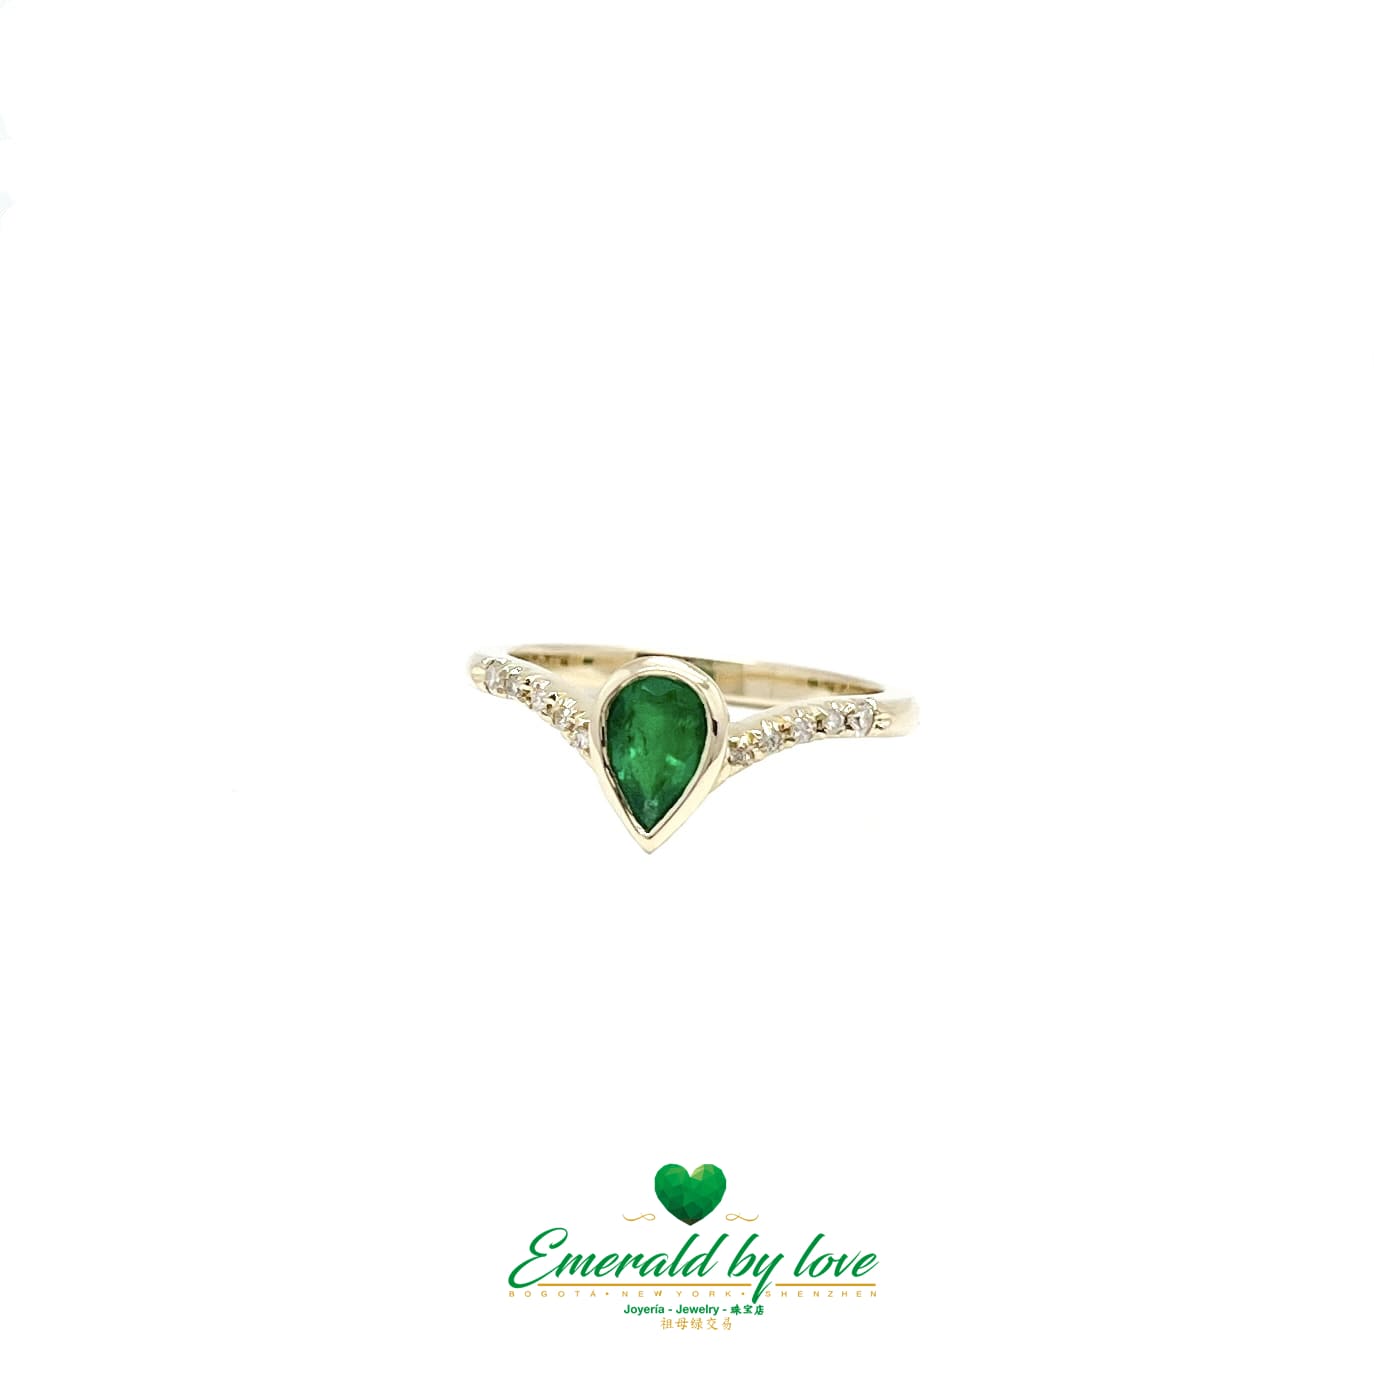 Yellow Gold Ring with Pear-Shaped Emerald Bezel-Set and Diamond Accents